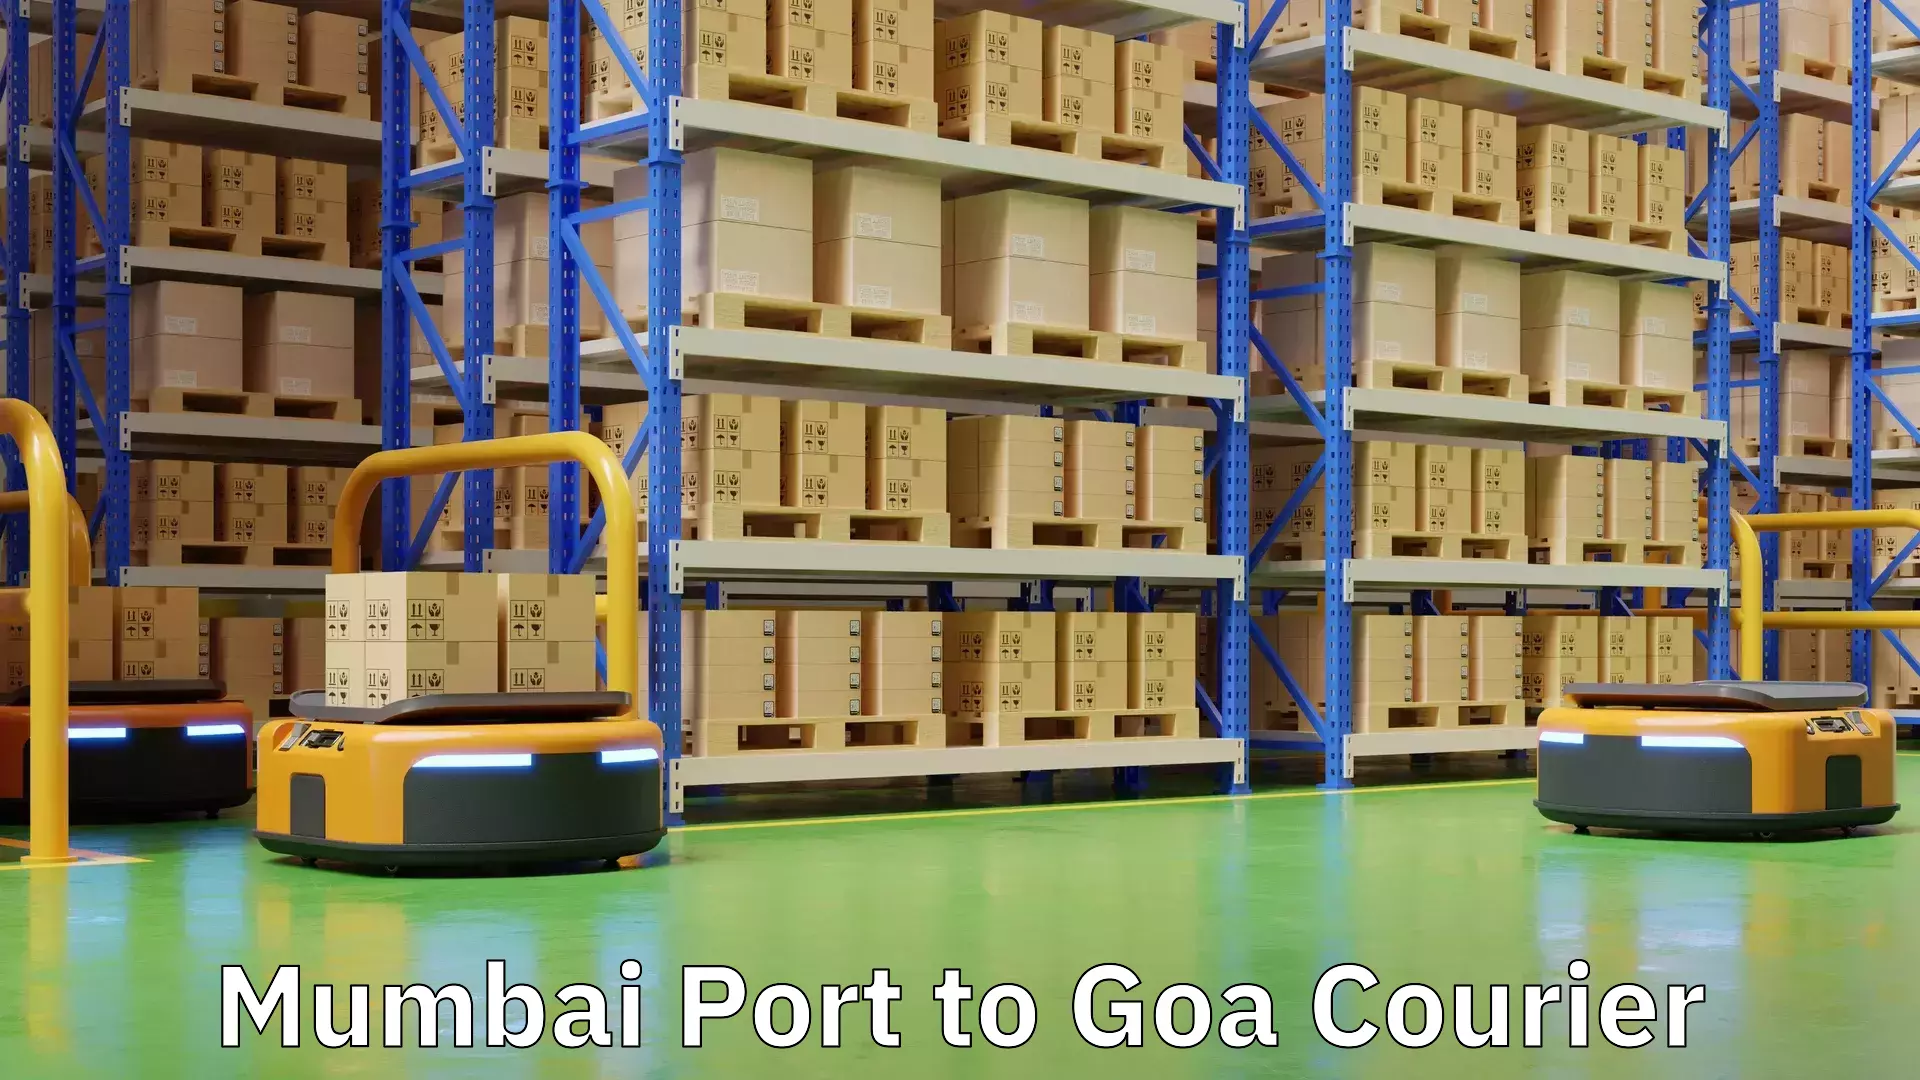 Personal parcel delivery in Mumbai Port to Goa